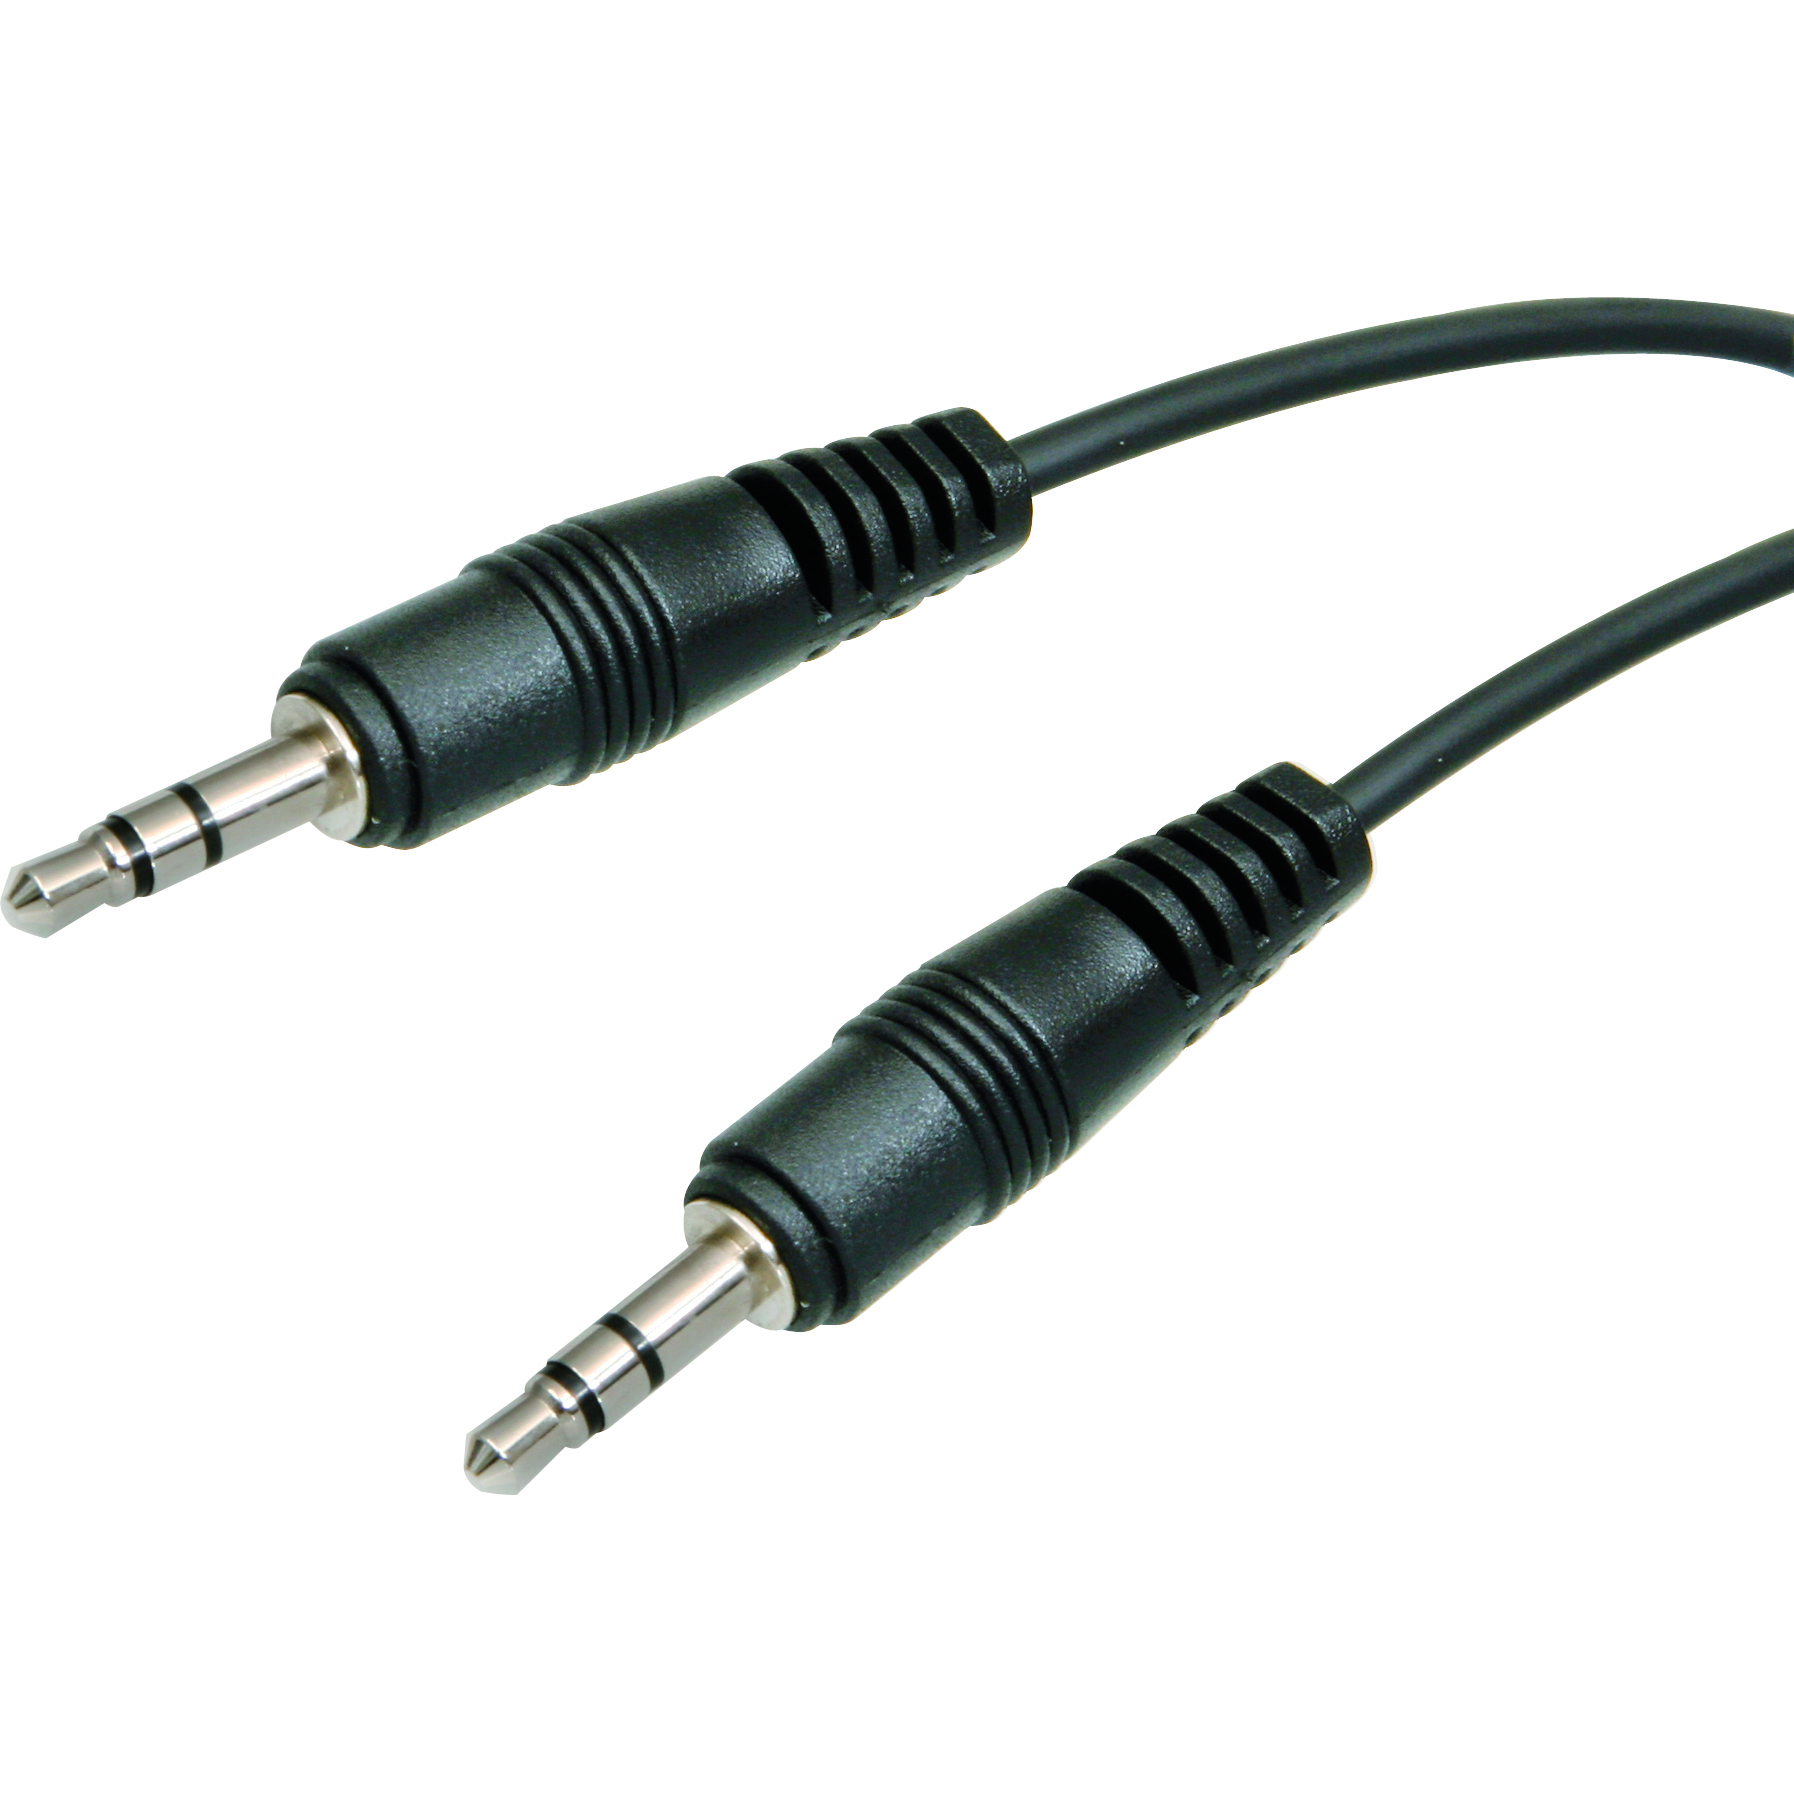 Audio Jack (Male to Male) Cable 2M - Limerick Computers